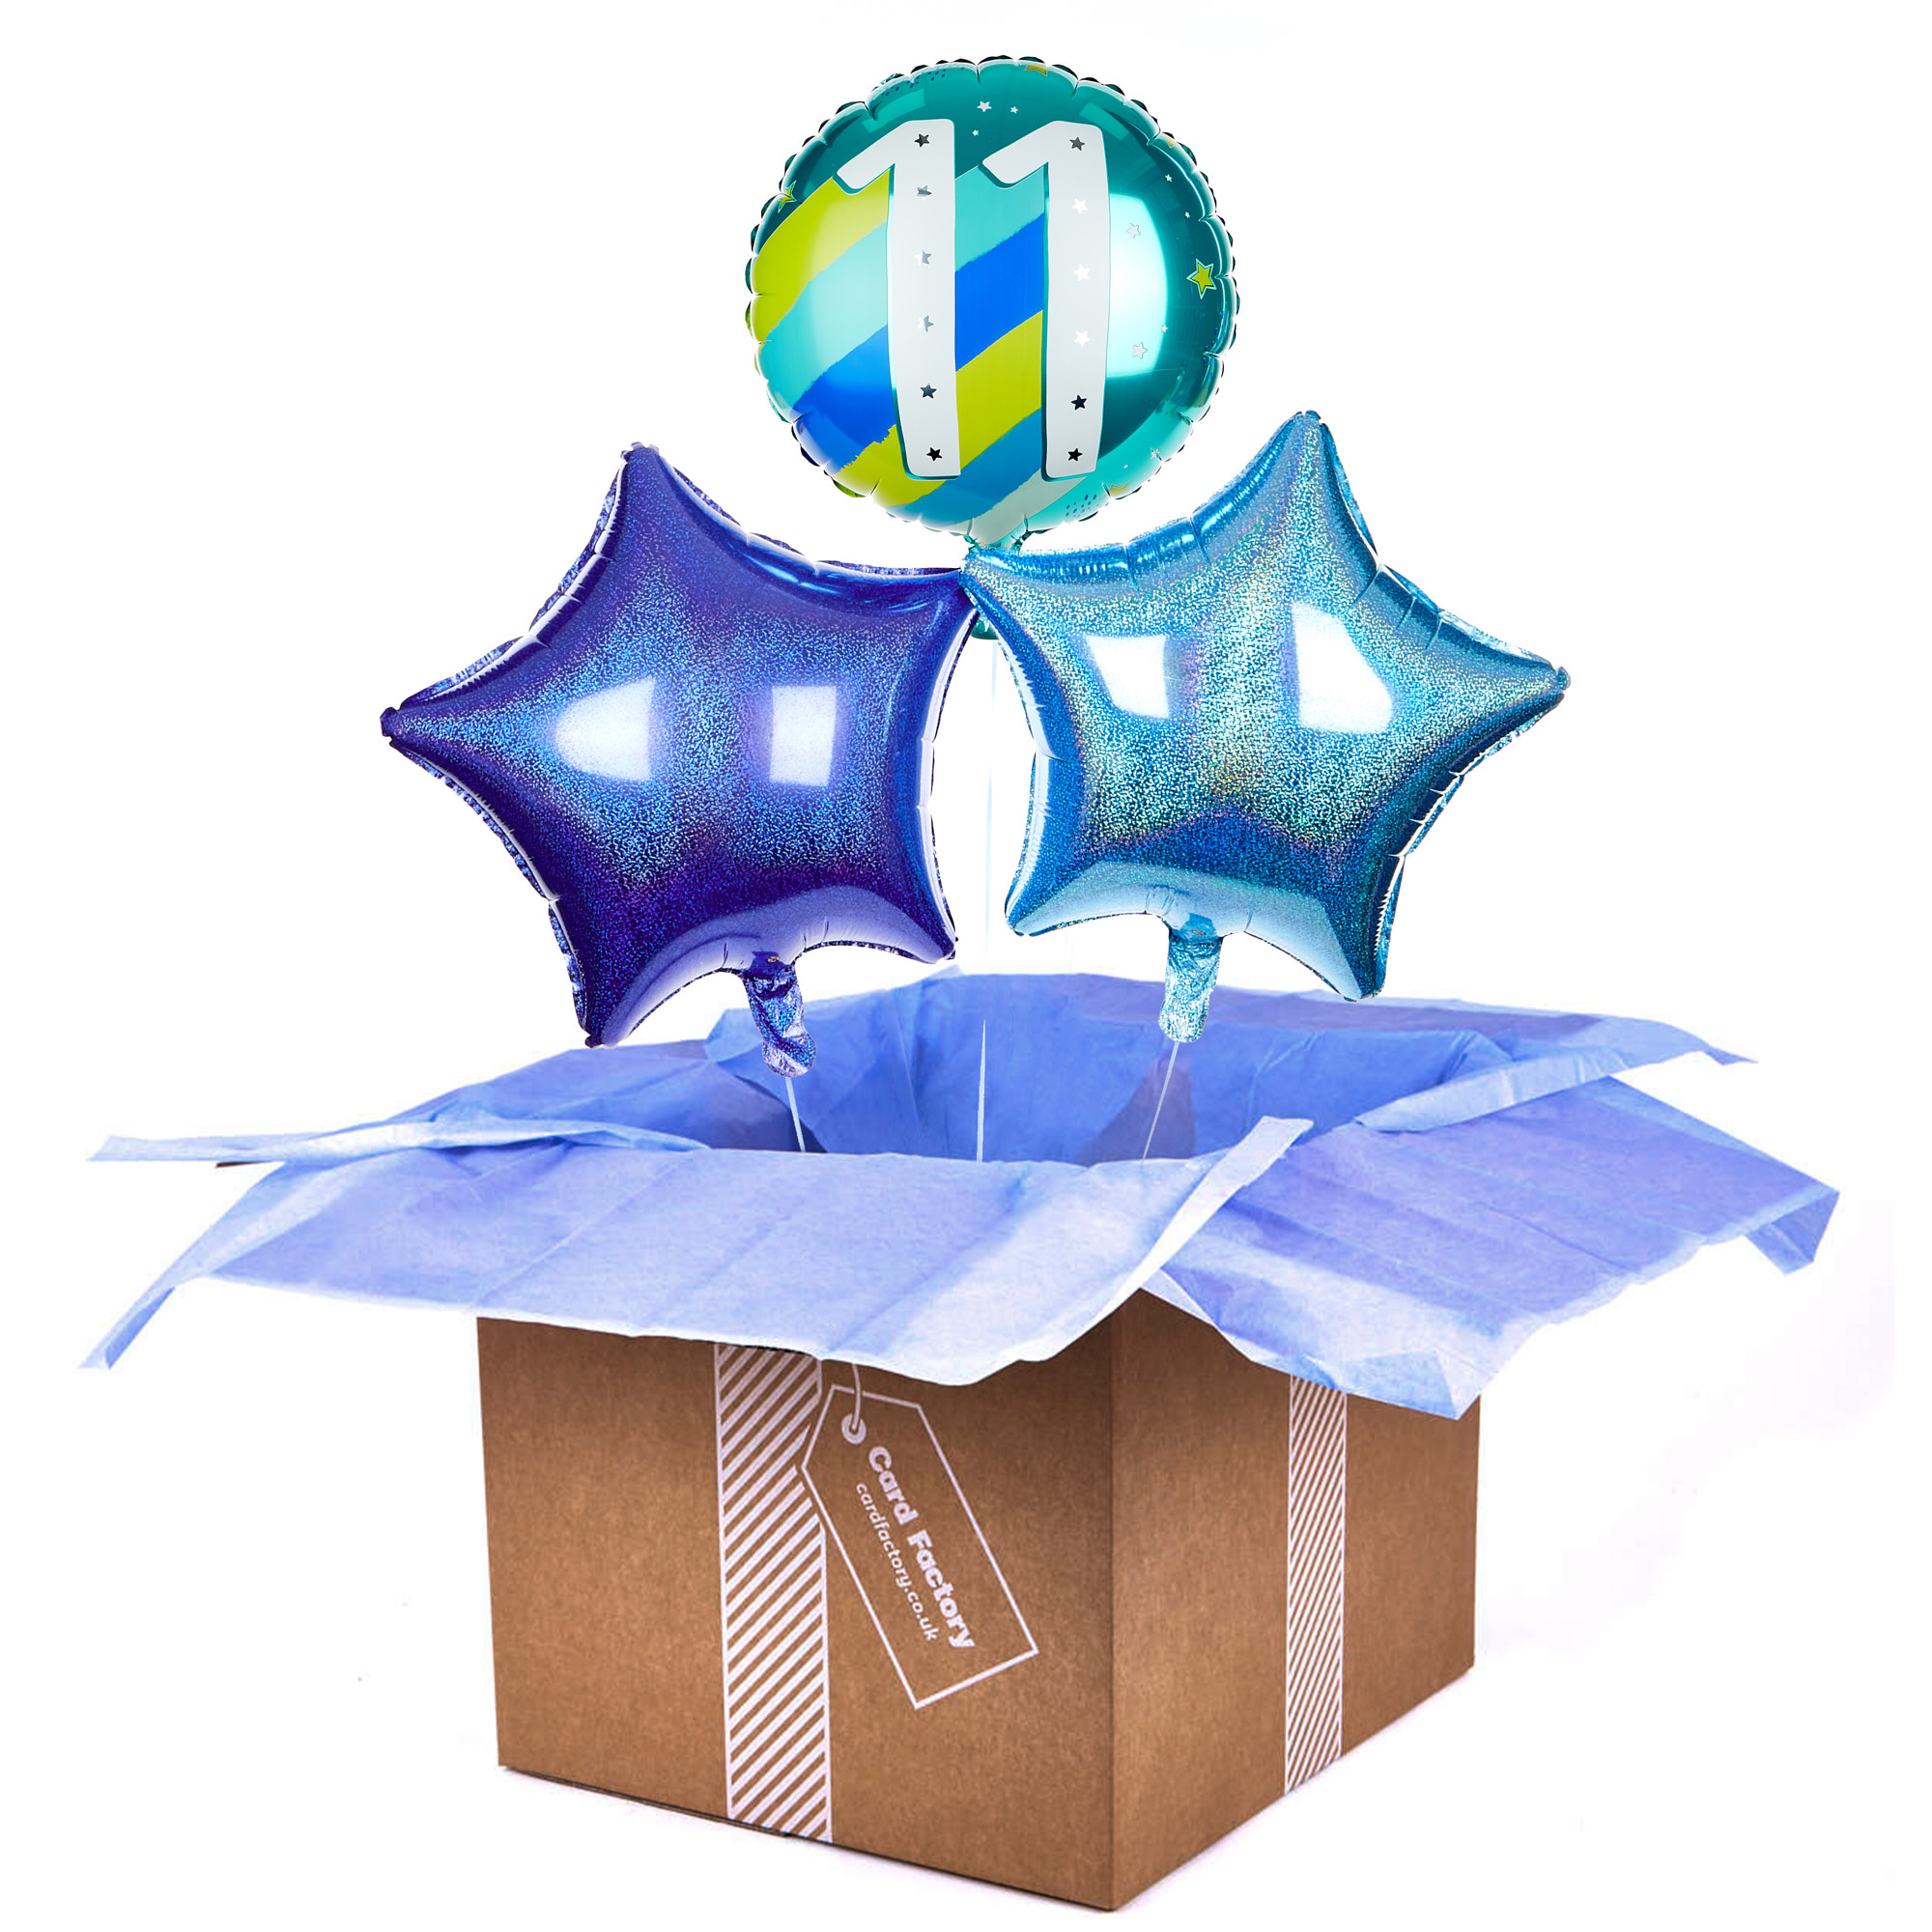 Blue & Green 11th Birthday Balloon Bouquet - DELIVERED INFLATED!